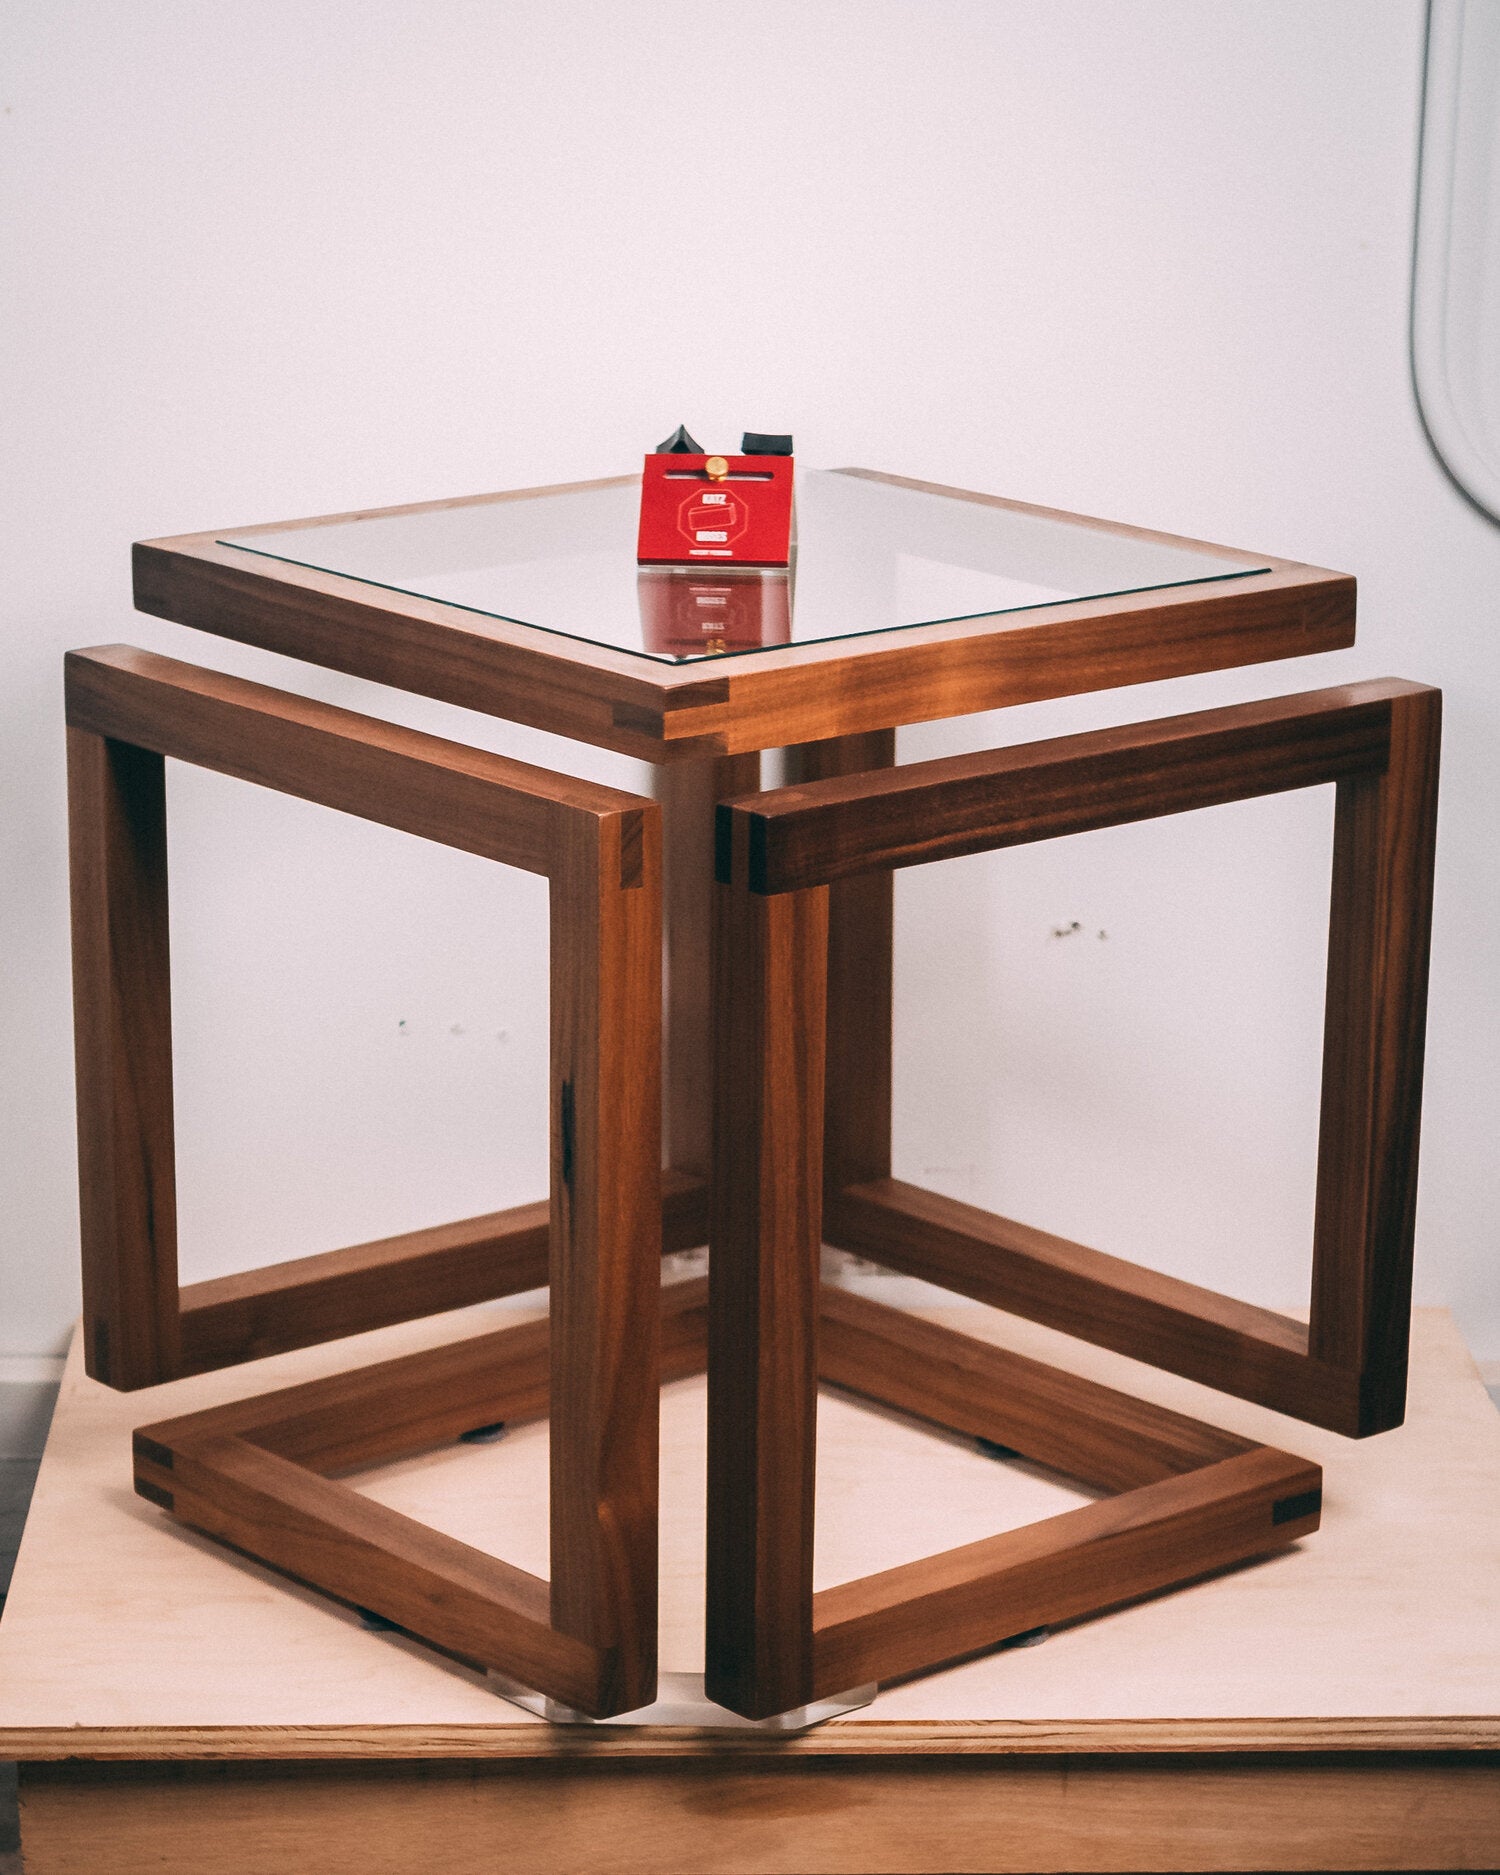 Infinity Cube Table Free Plans